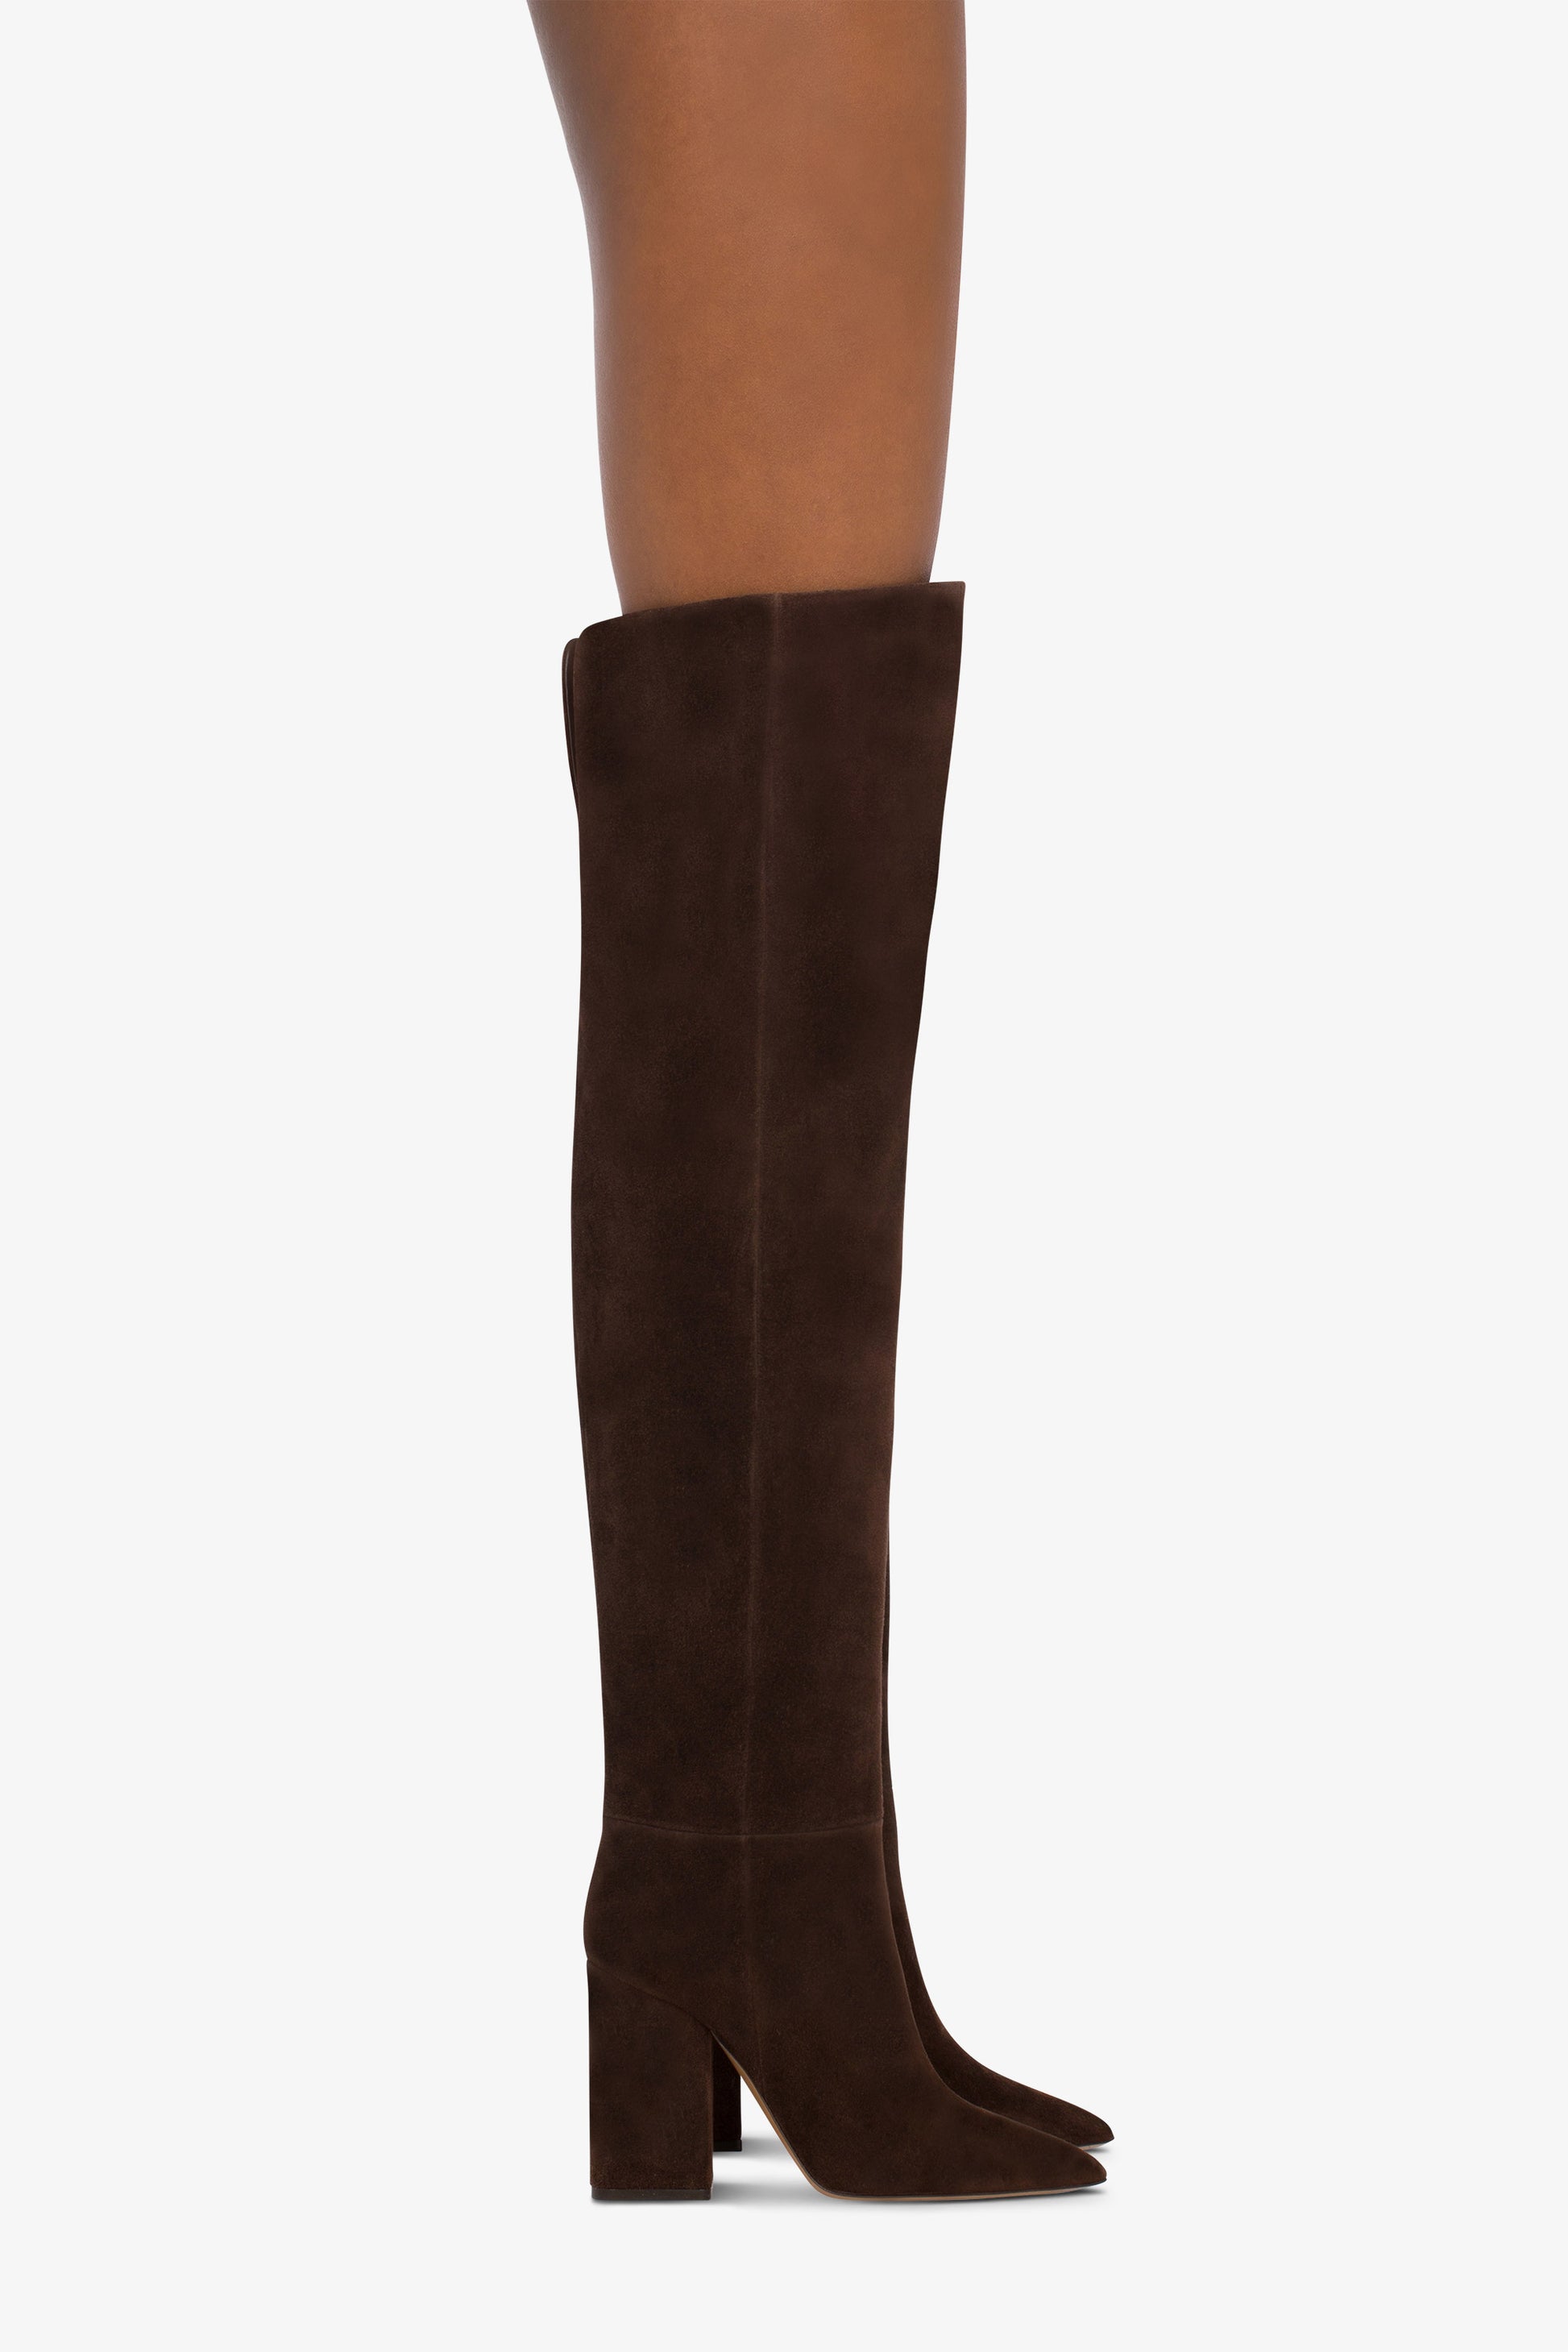 Over-the-knee, long pointed boots in soft pepper suede leather - Producto usado